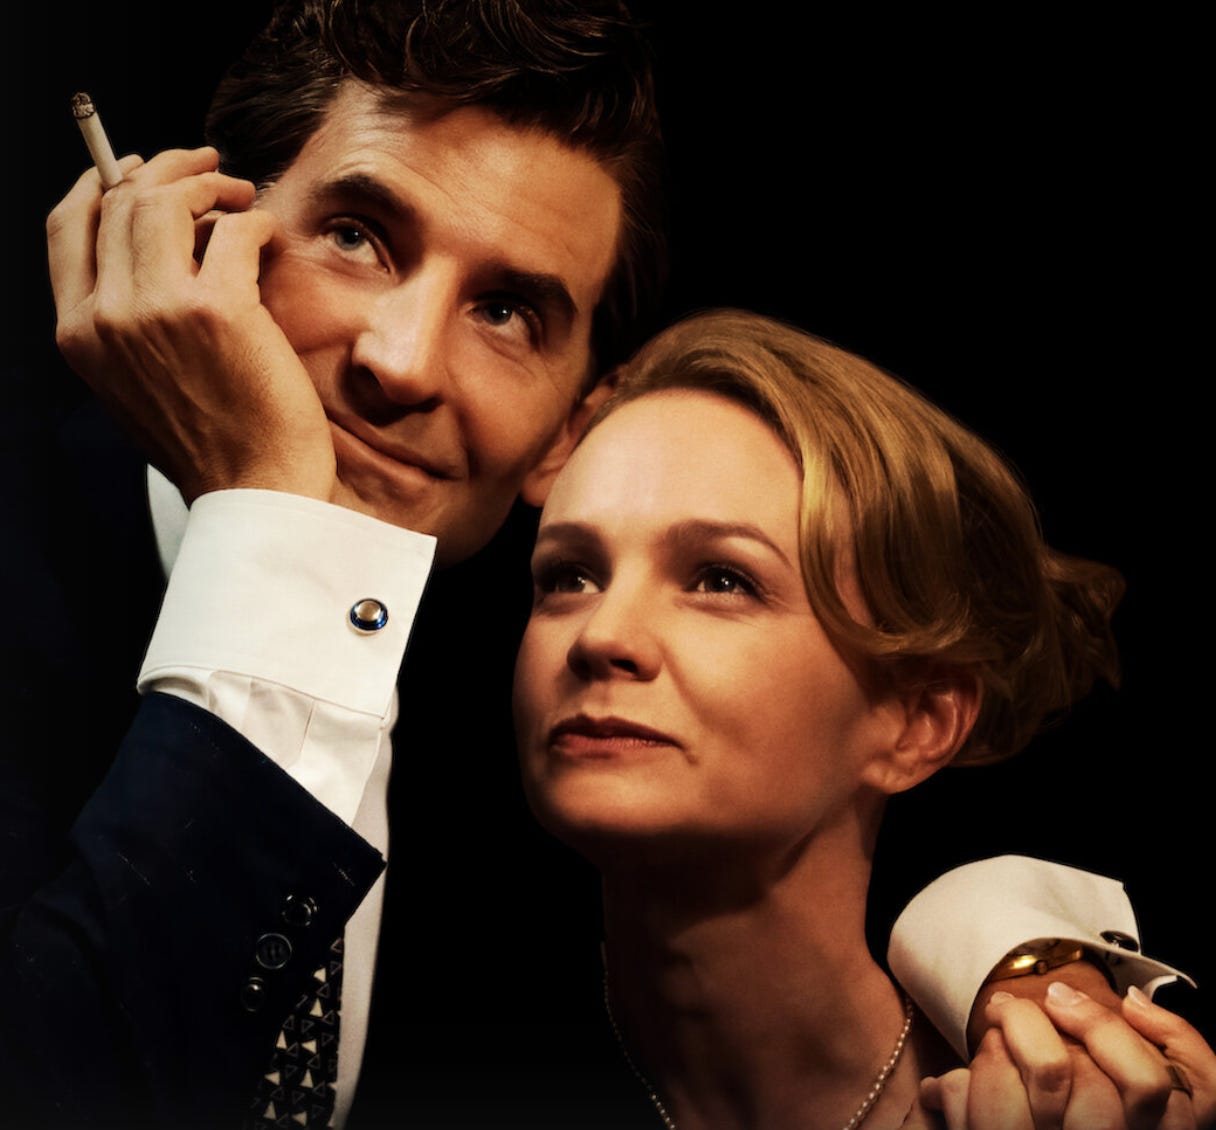 small image showing the two stars of Maestro, Bradley Cooper and Carey Mulligan